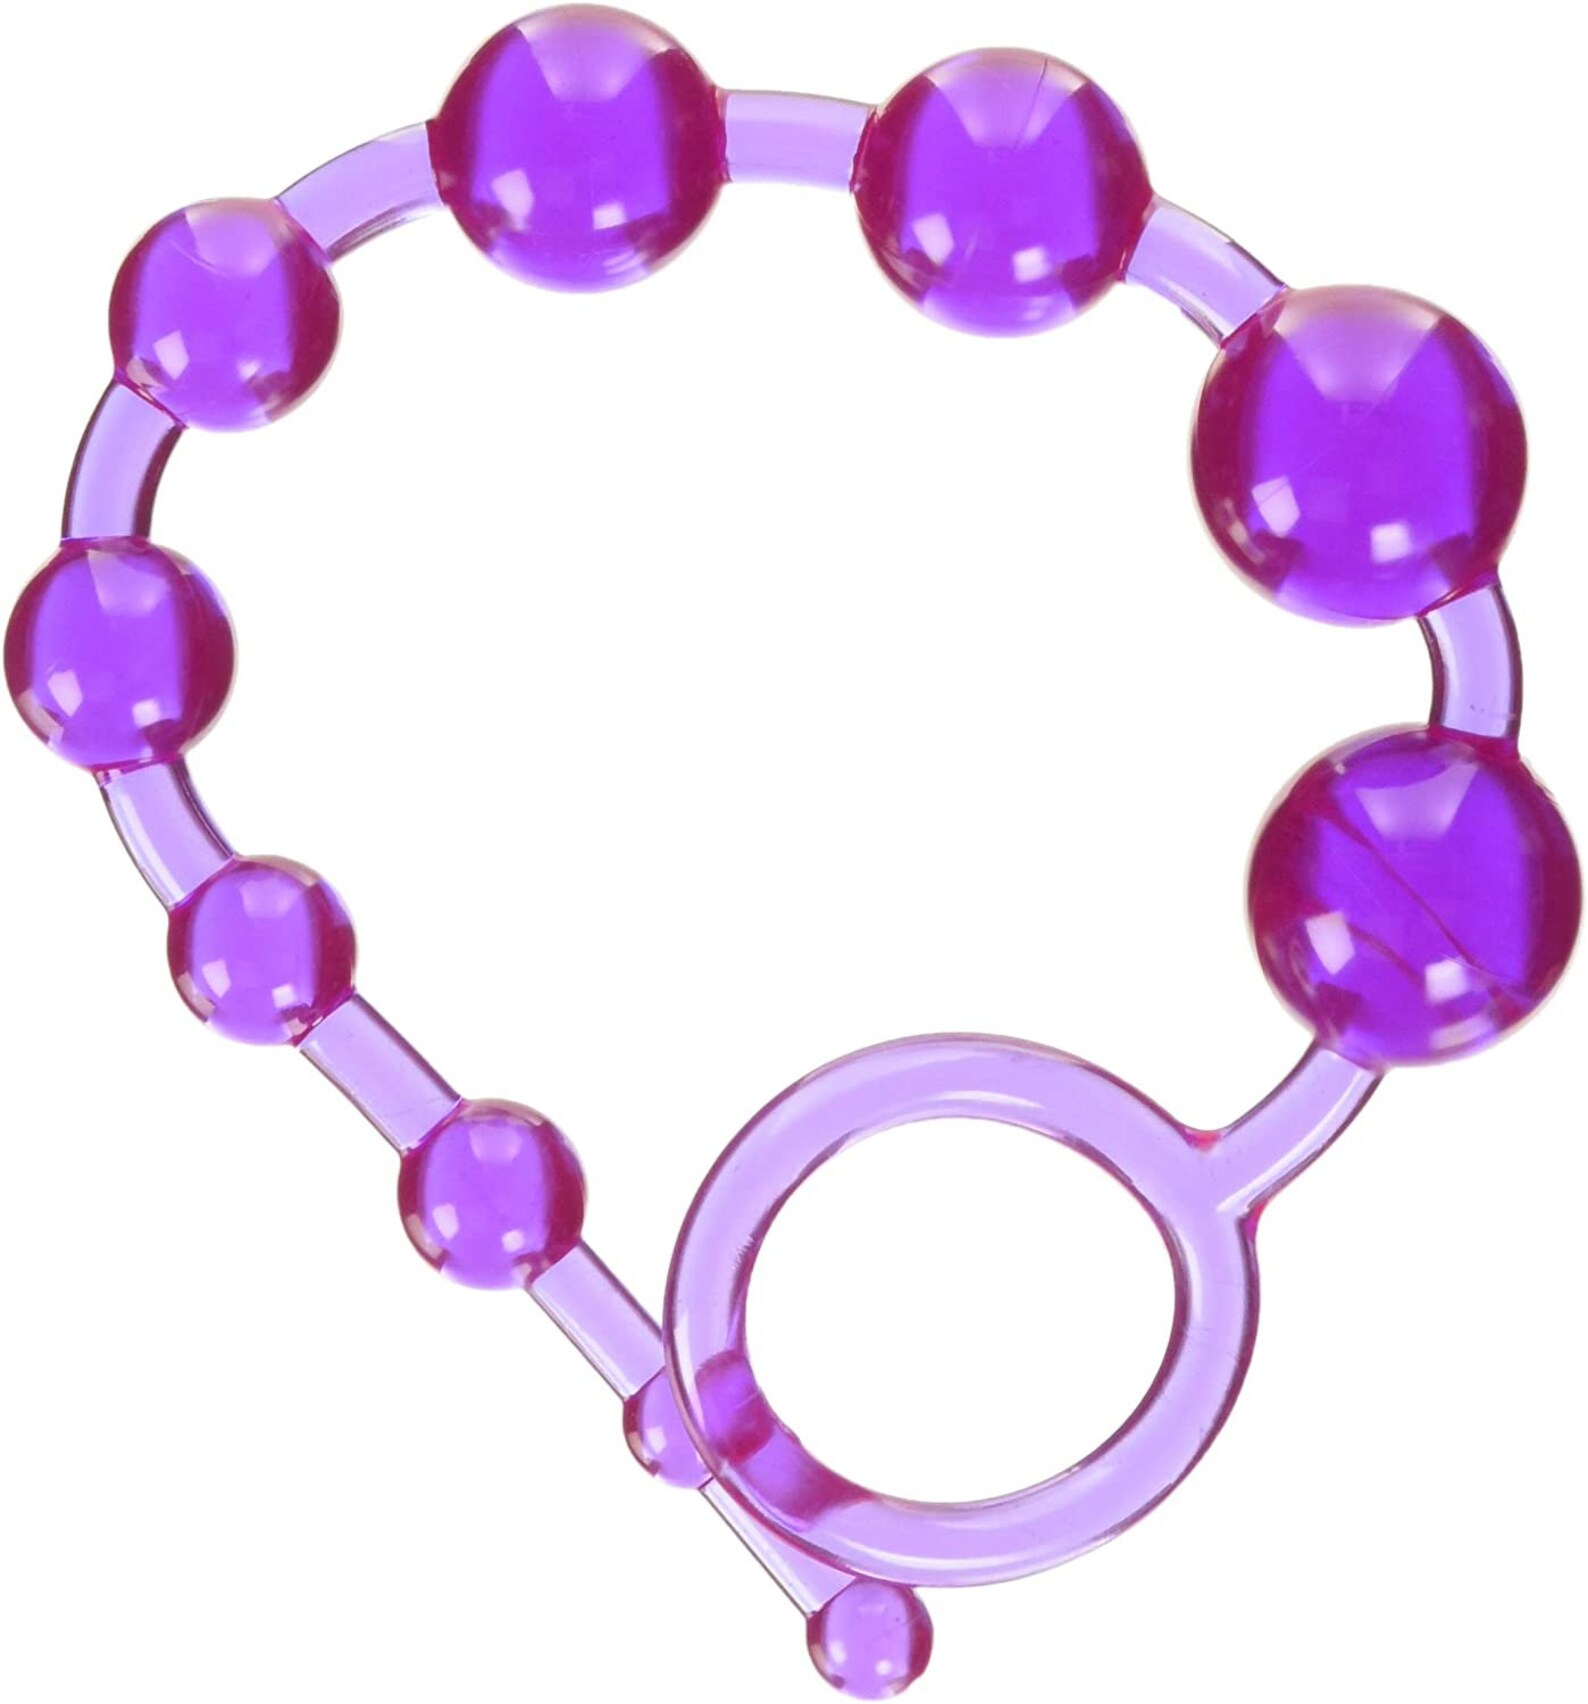 Anal Beads Jelly Chain Butt Plug Sex Toy For Woman And Man 5 Etsy